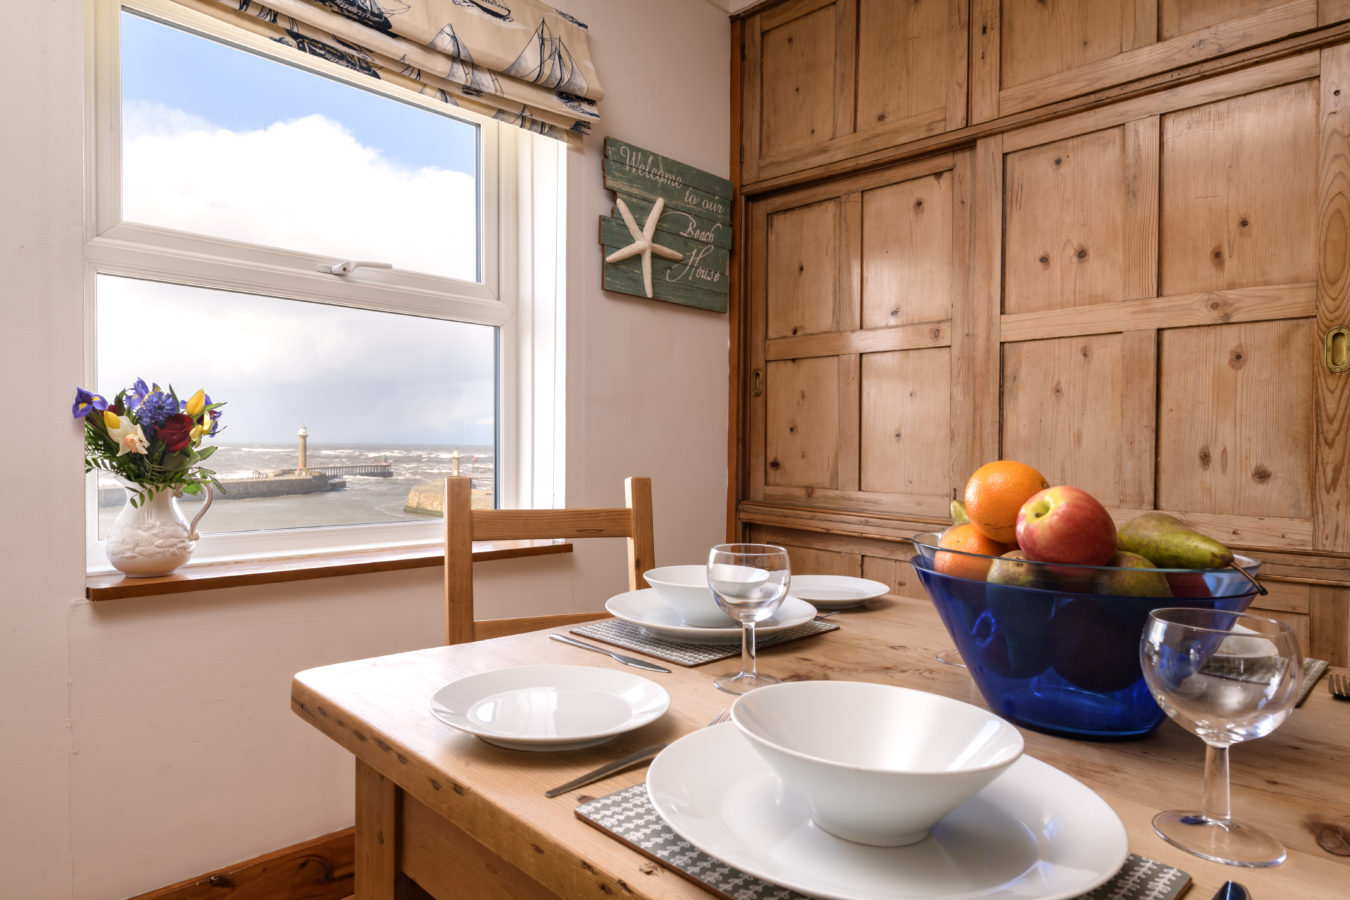 Whitby holiday cottages, cottage in Whitby, cottage with sea view whitby